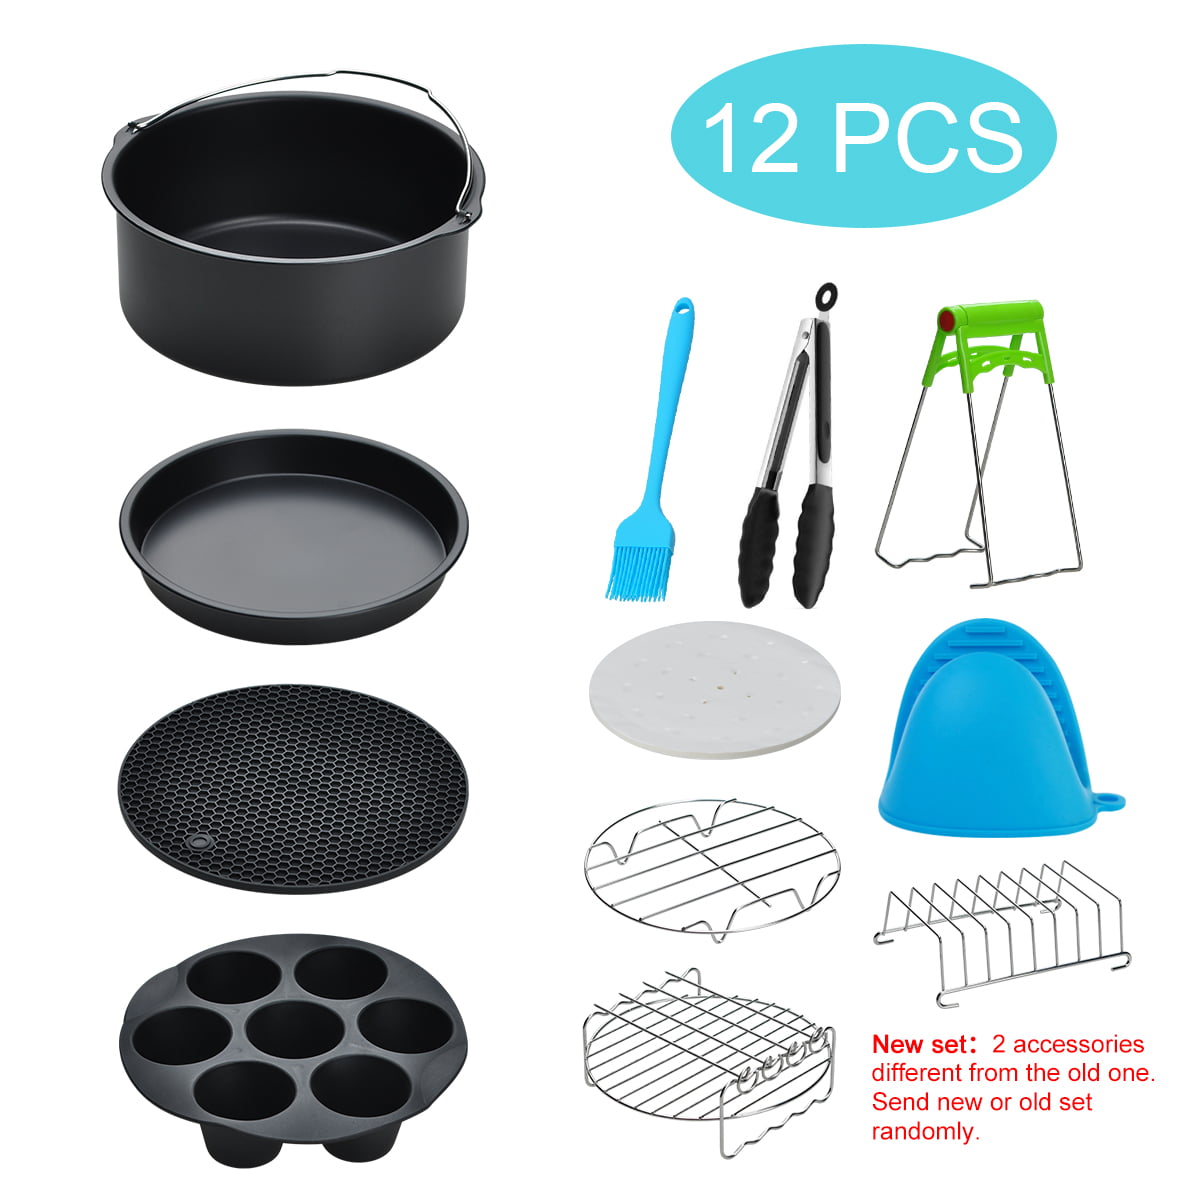 12pcs/set 7 Inch / 8 Inch Air Fryer Accessories for Gowise